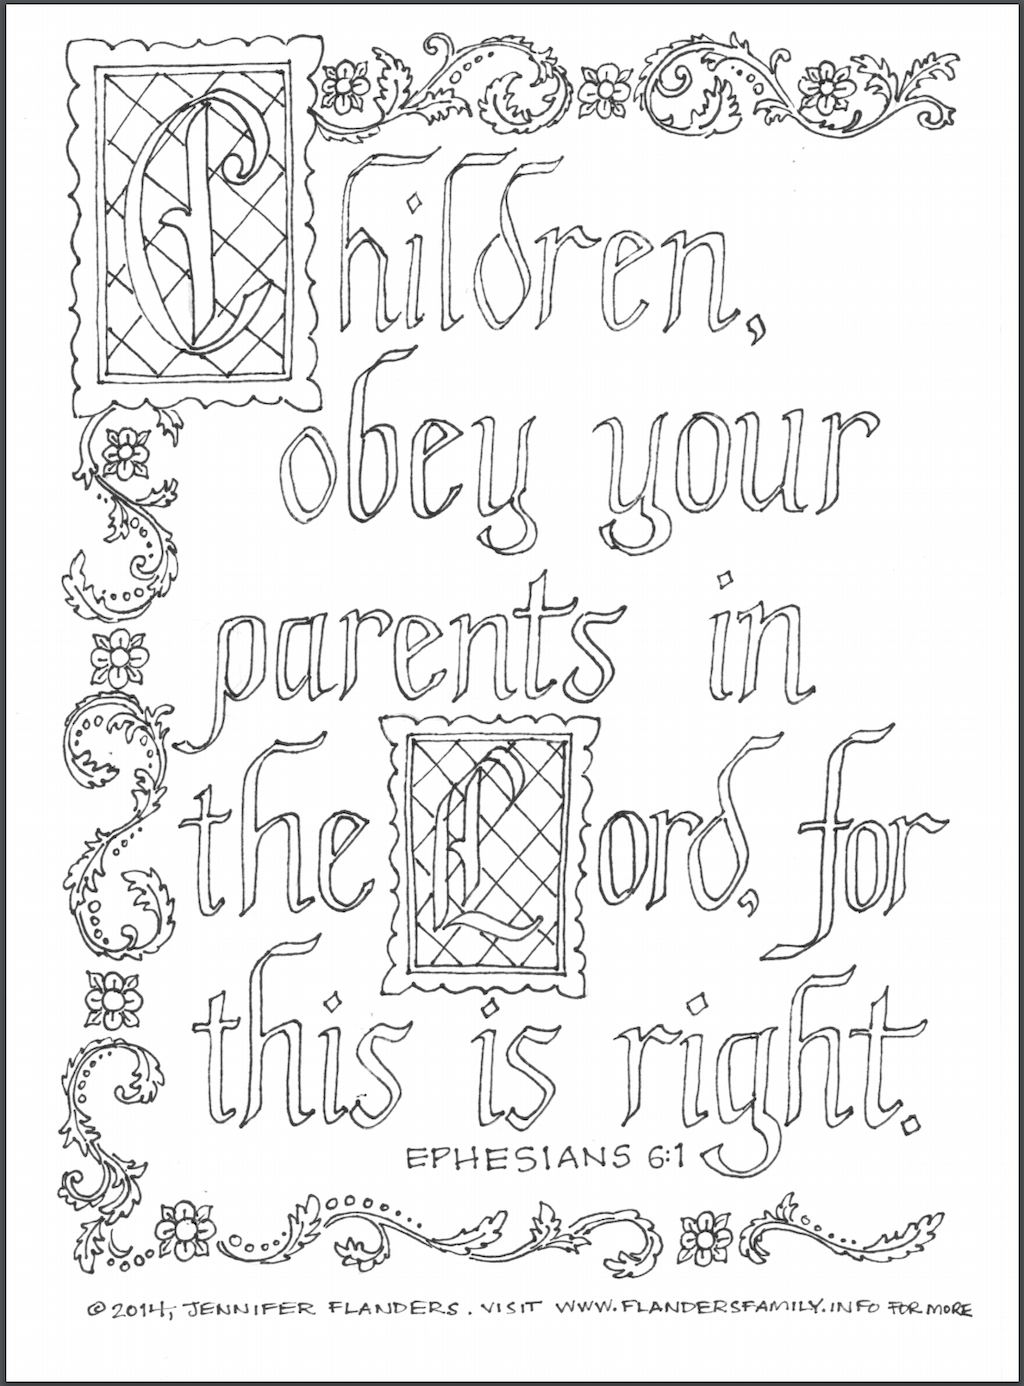 Free Printables from www.flandersfamily.info 